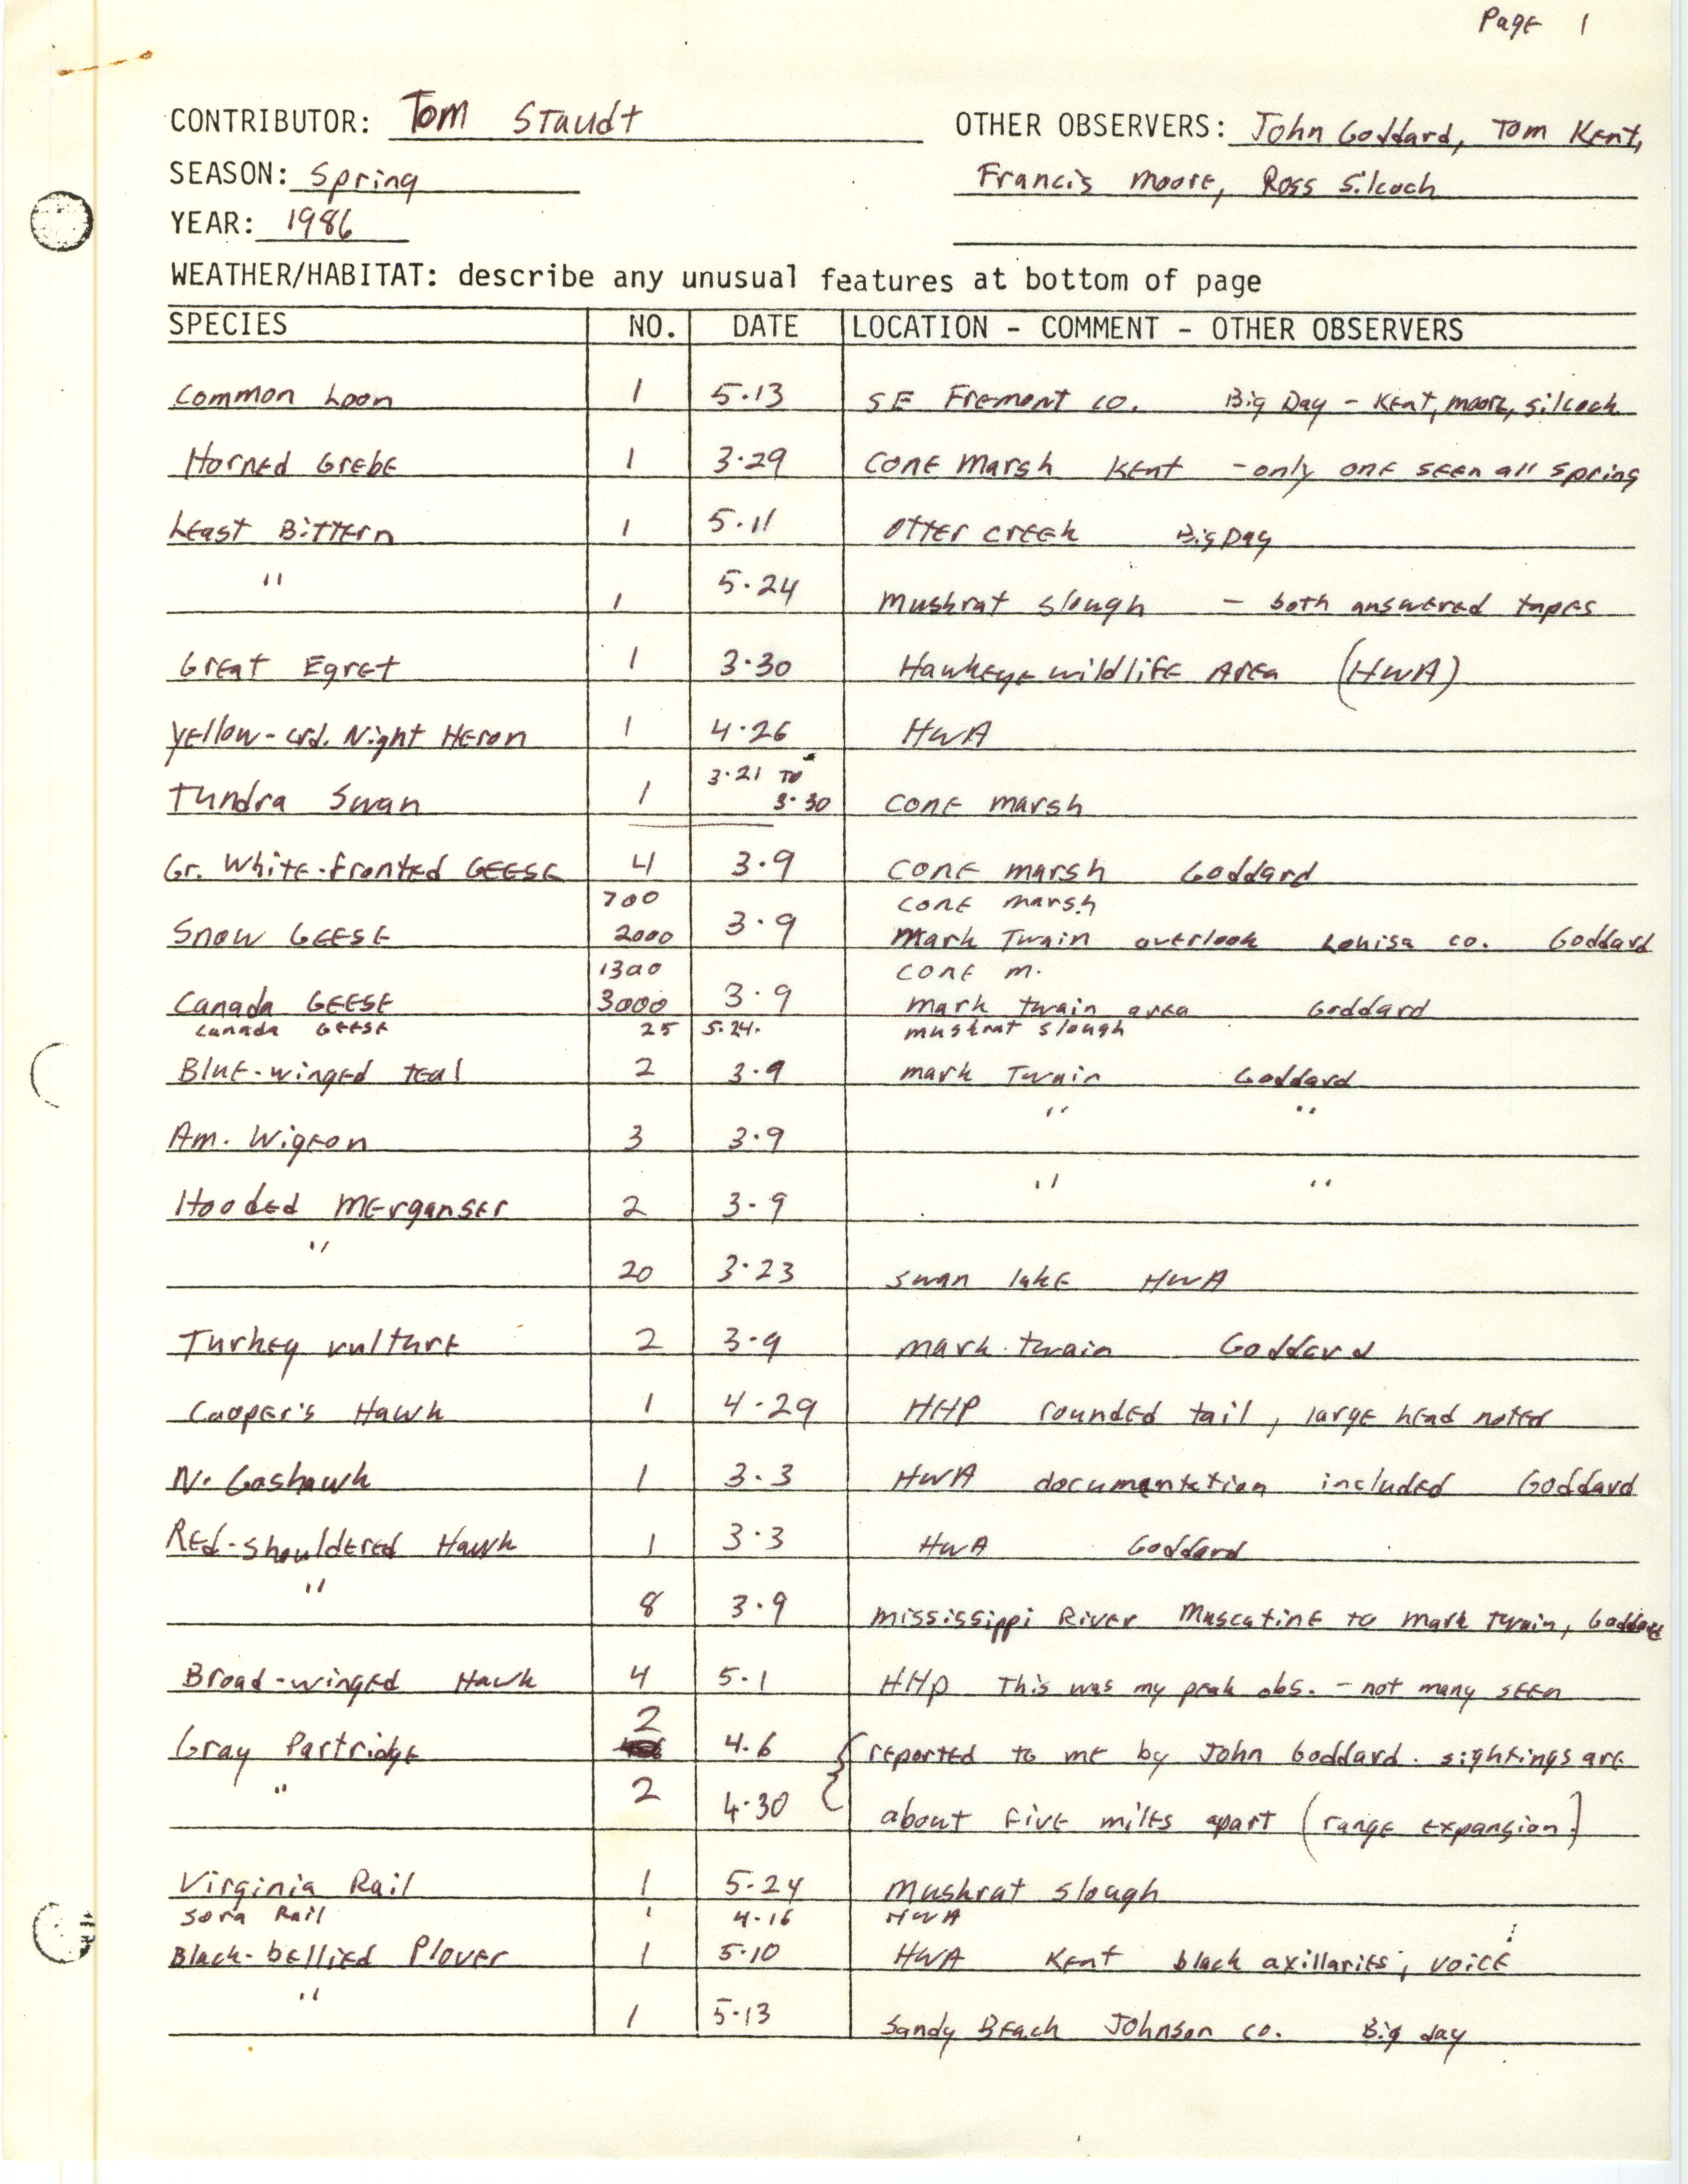 Annotated bird sighting list for Spring 1986 compiled by Tom Staudt